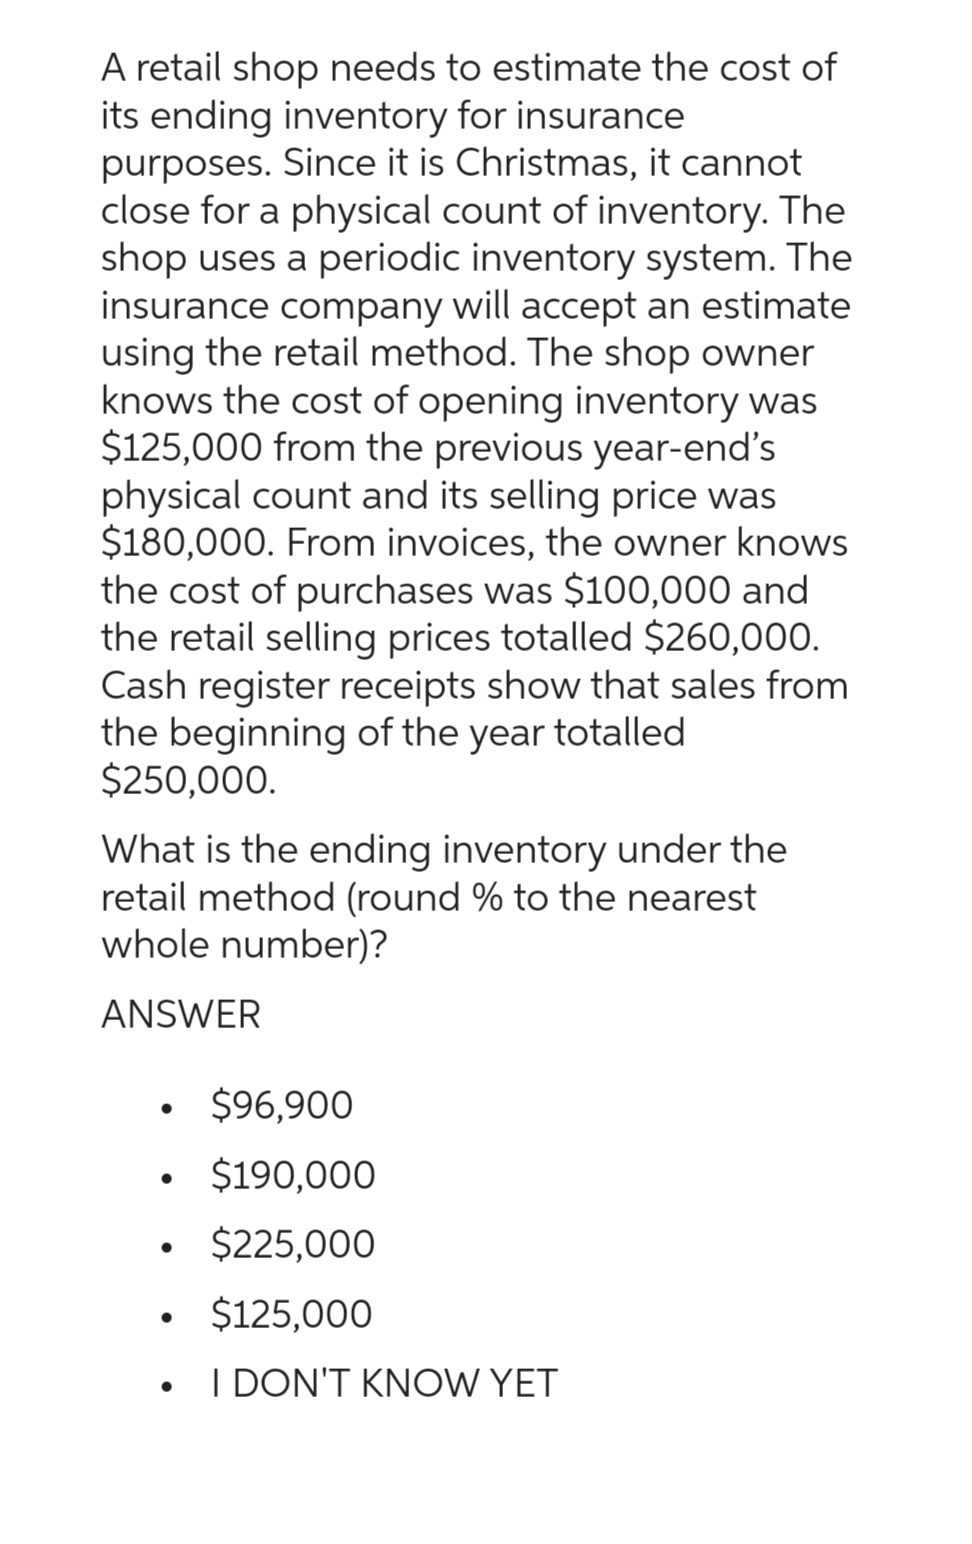 A retail shop needs to estimate the cost of
its ending inventory for insurance
purposes. Since it is Christmas, it cannot
close for a physical count of inventory. The
shop uses a periodic inventory system. The
insurance company will accept an estimate
using the retail method. The shop owner
knows the cost of opening inventory was
$125,000 from the previous year-end's
physical count and its selling price was
$180,000. From invoices, the owner knows
the cost of purchases was $100,000 and
the retail selling prices totalled $260,000.
Cash register receipts show that sales from
the beginning of the year totalled
$250,000.
What is the ending inventory under the
retail method (round % to the nearest
whole number)?
ANSWER
●
●
$96,900
$190,000
$225,000
$125,000
I DON'T KNOW YET